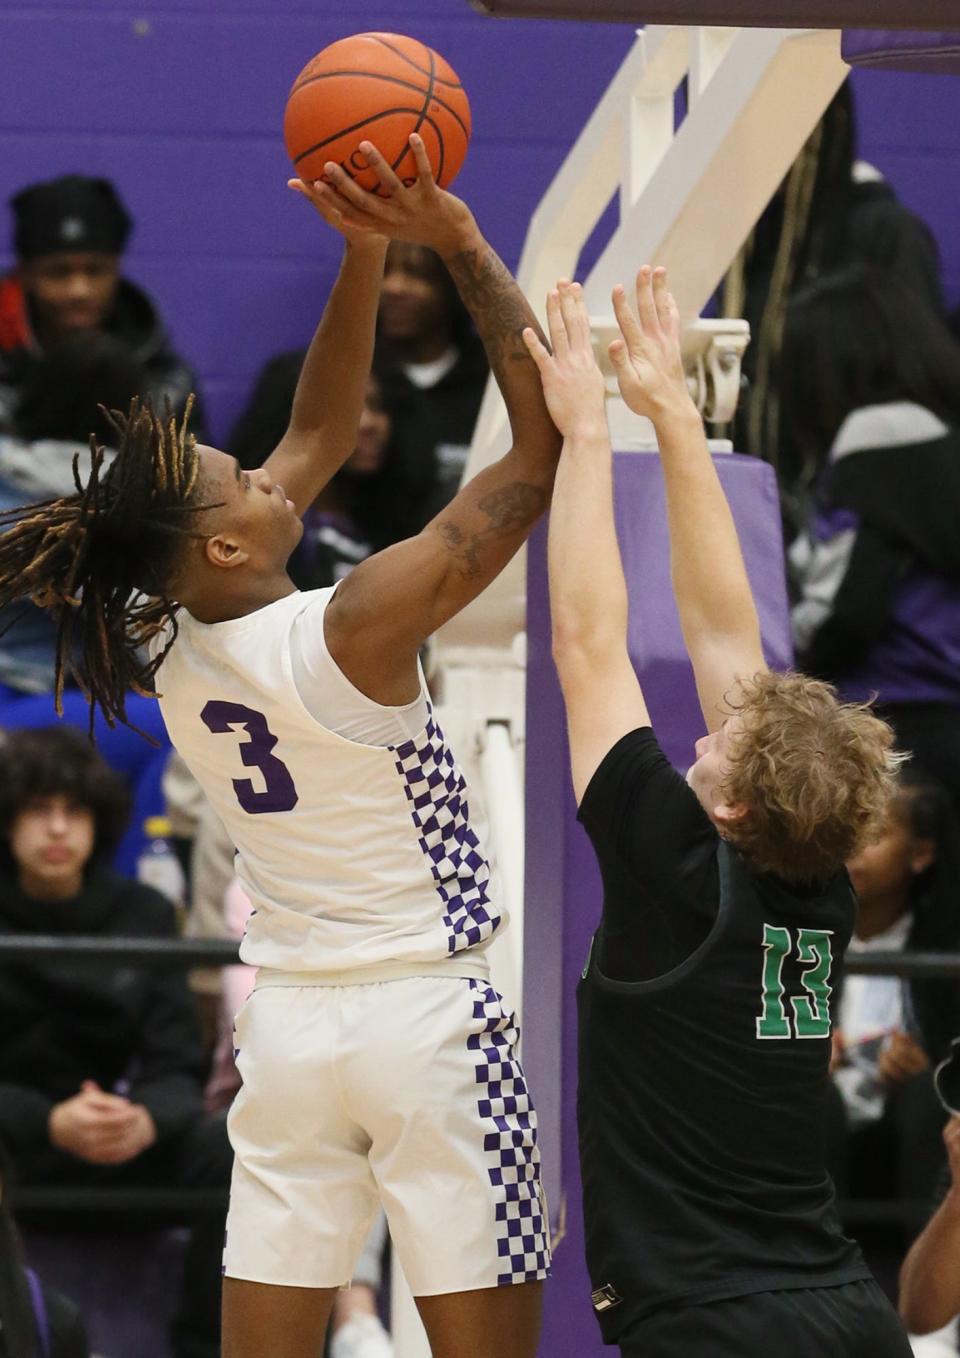 Barberton's De'Arion Holley shoots over Highland's Hunter Winston in a key Suburban League matchup won by the Magics.